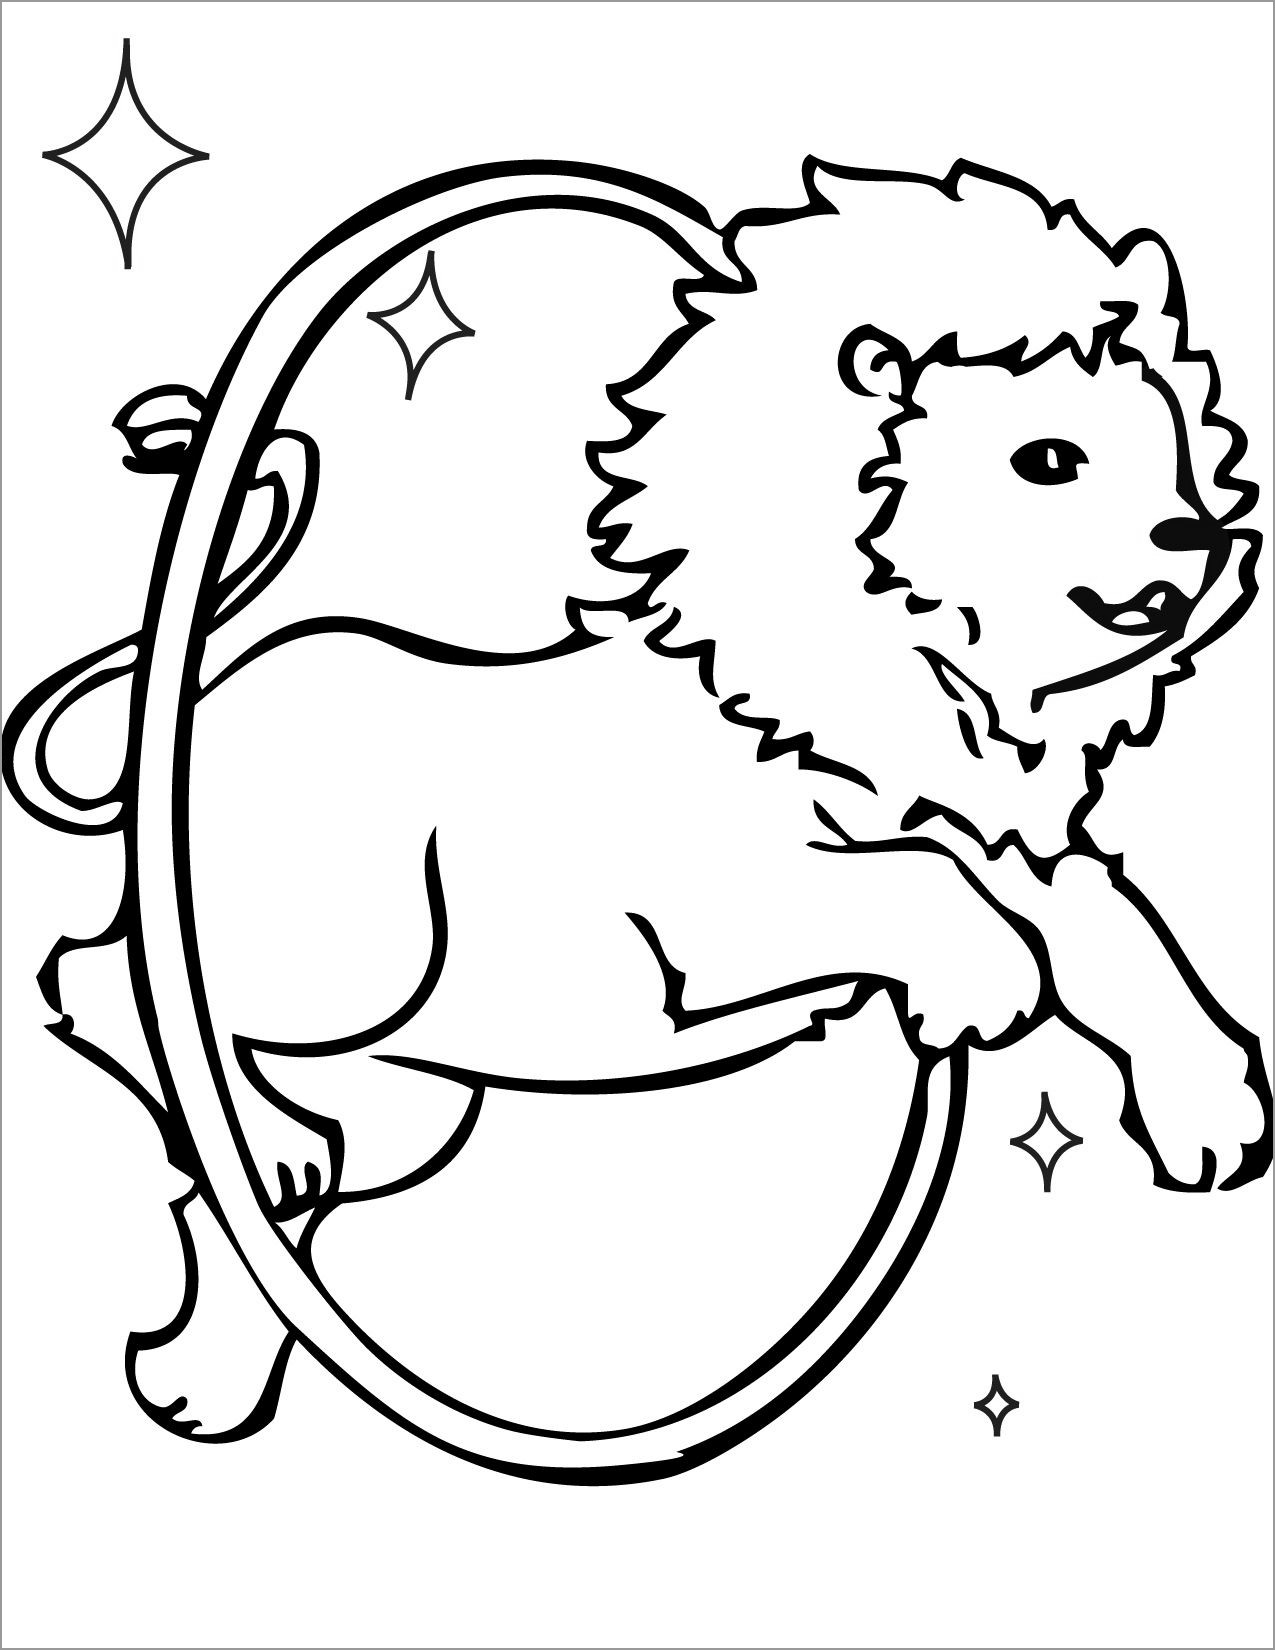 Circus Animals Coloring Page to Print